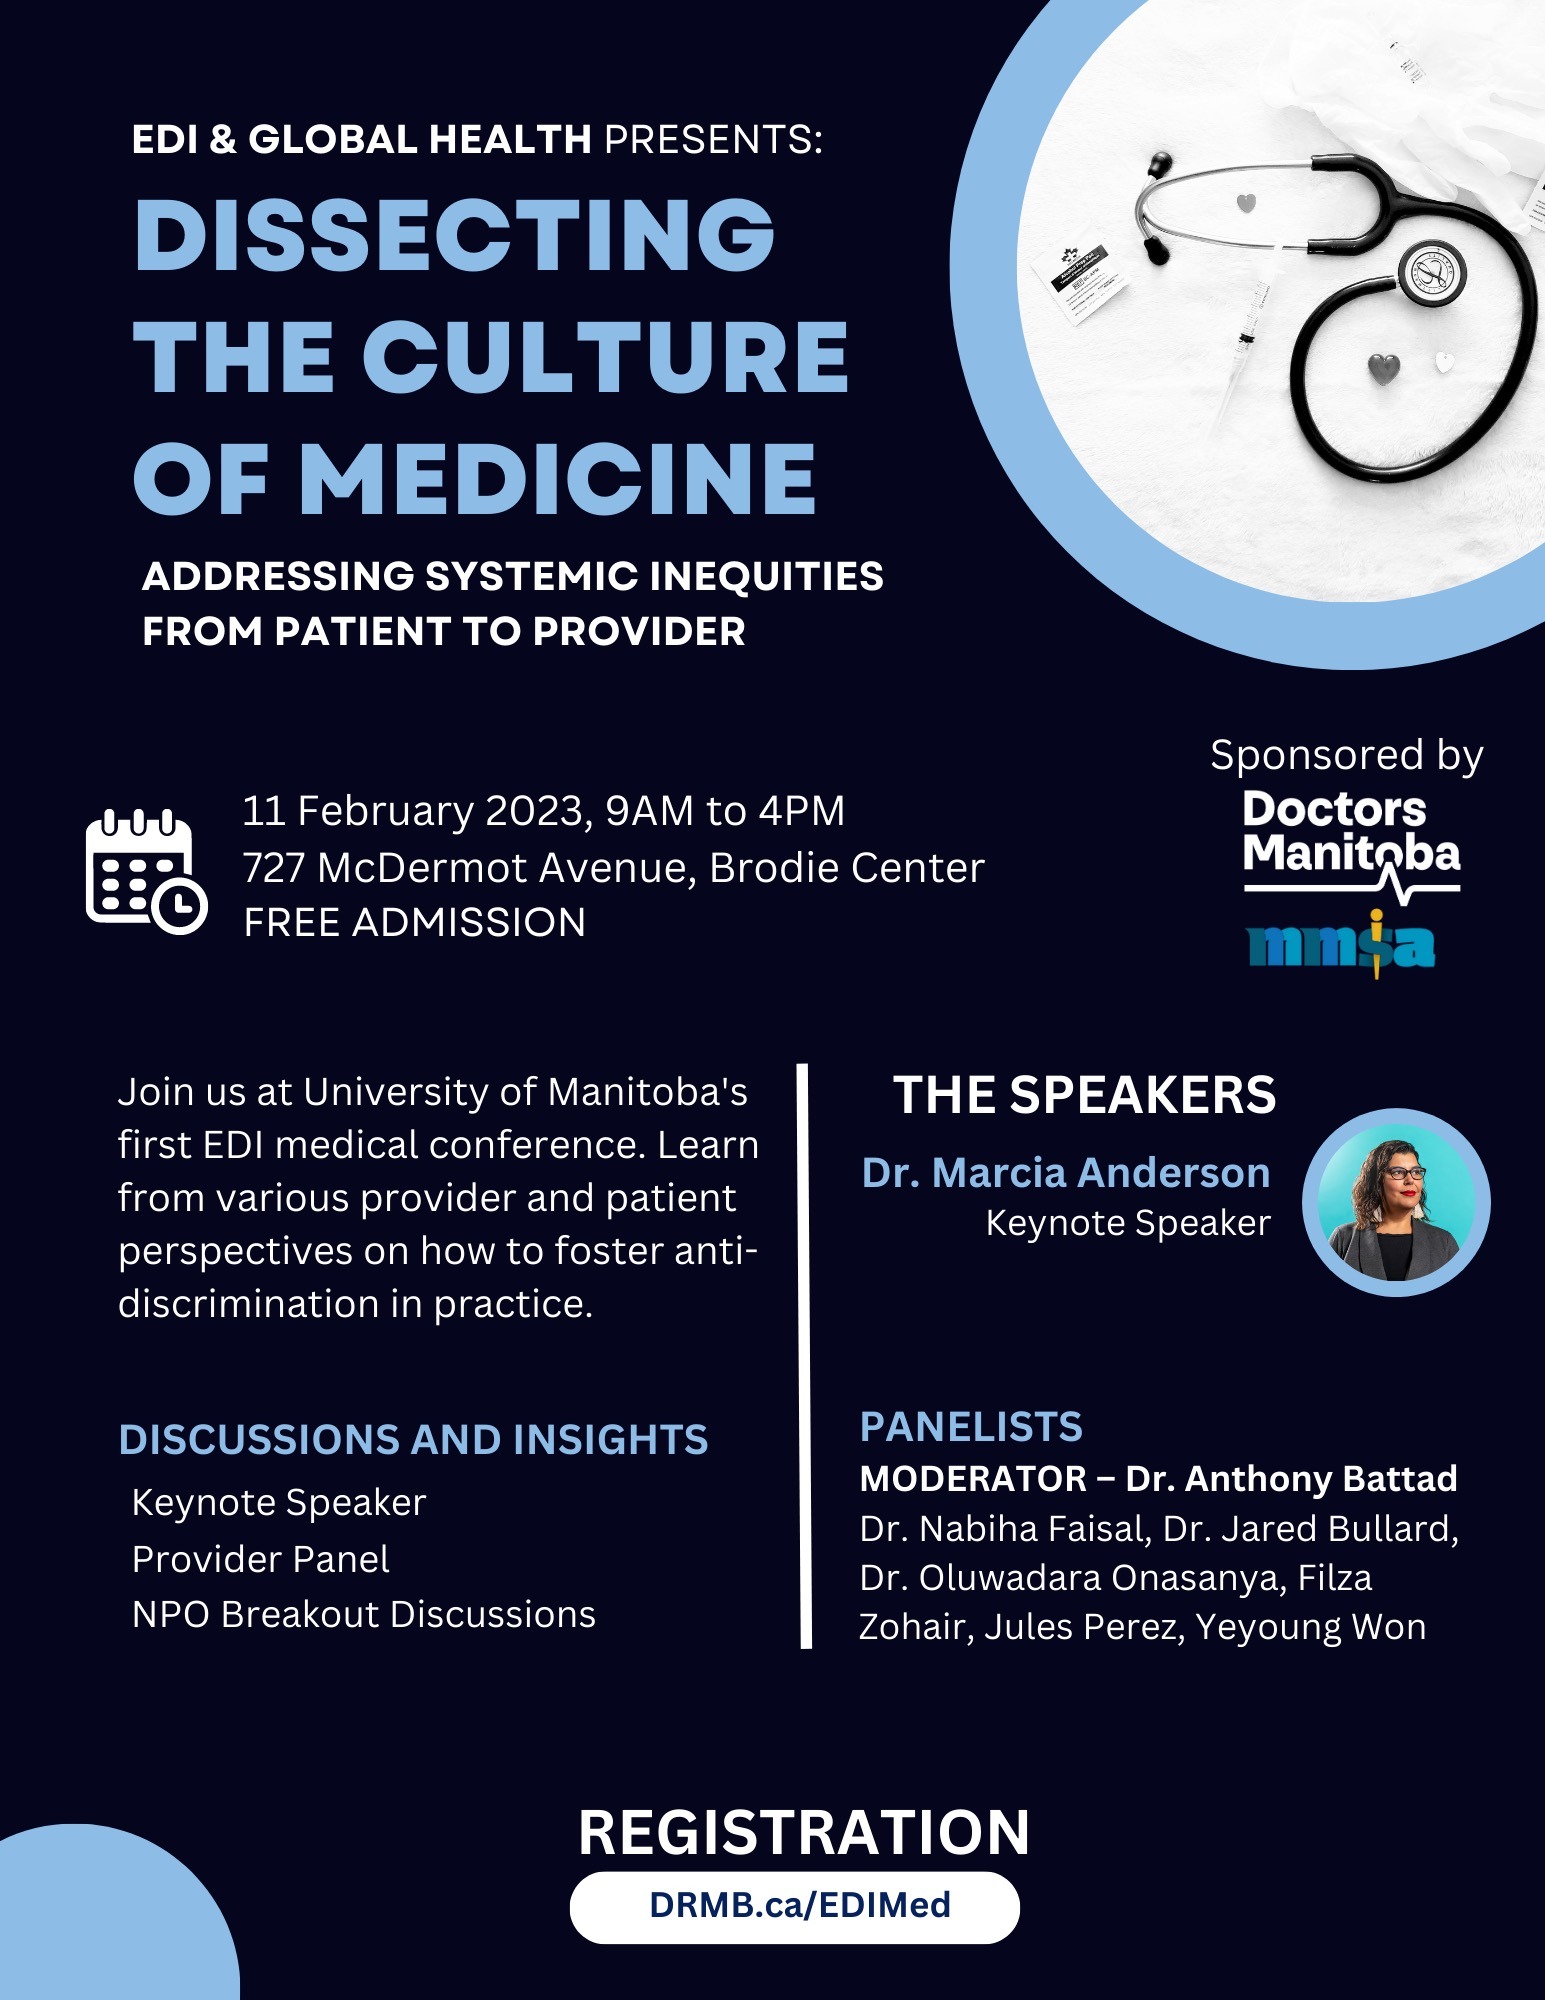 EDI and Global Health Present: Dissecting the Culture of Medicine